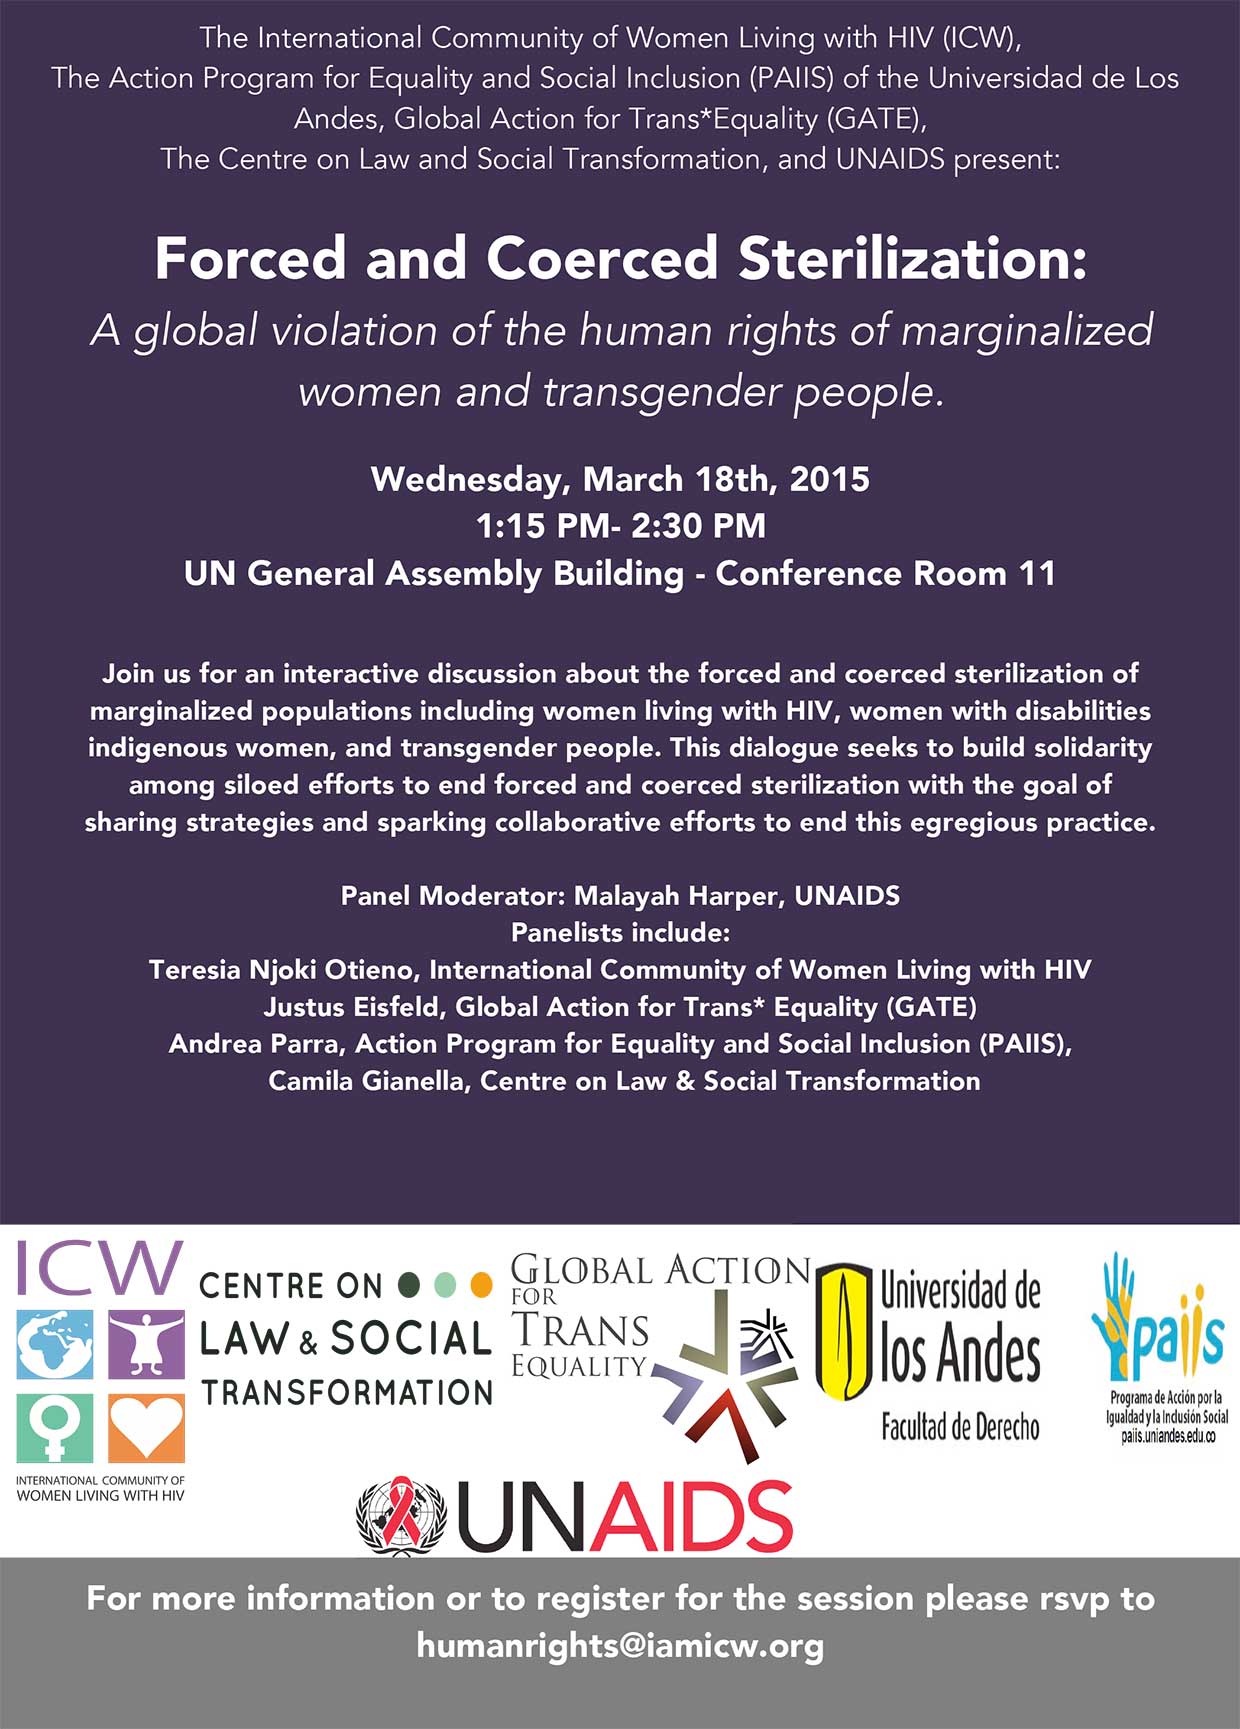 Forced and Coerced Sterilization